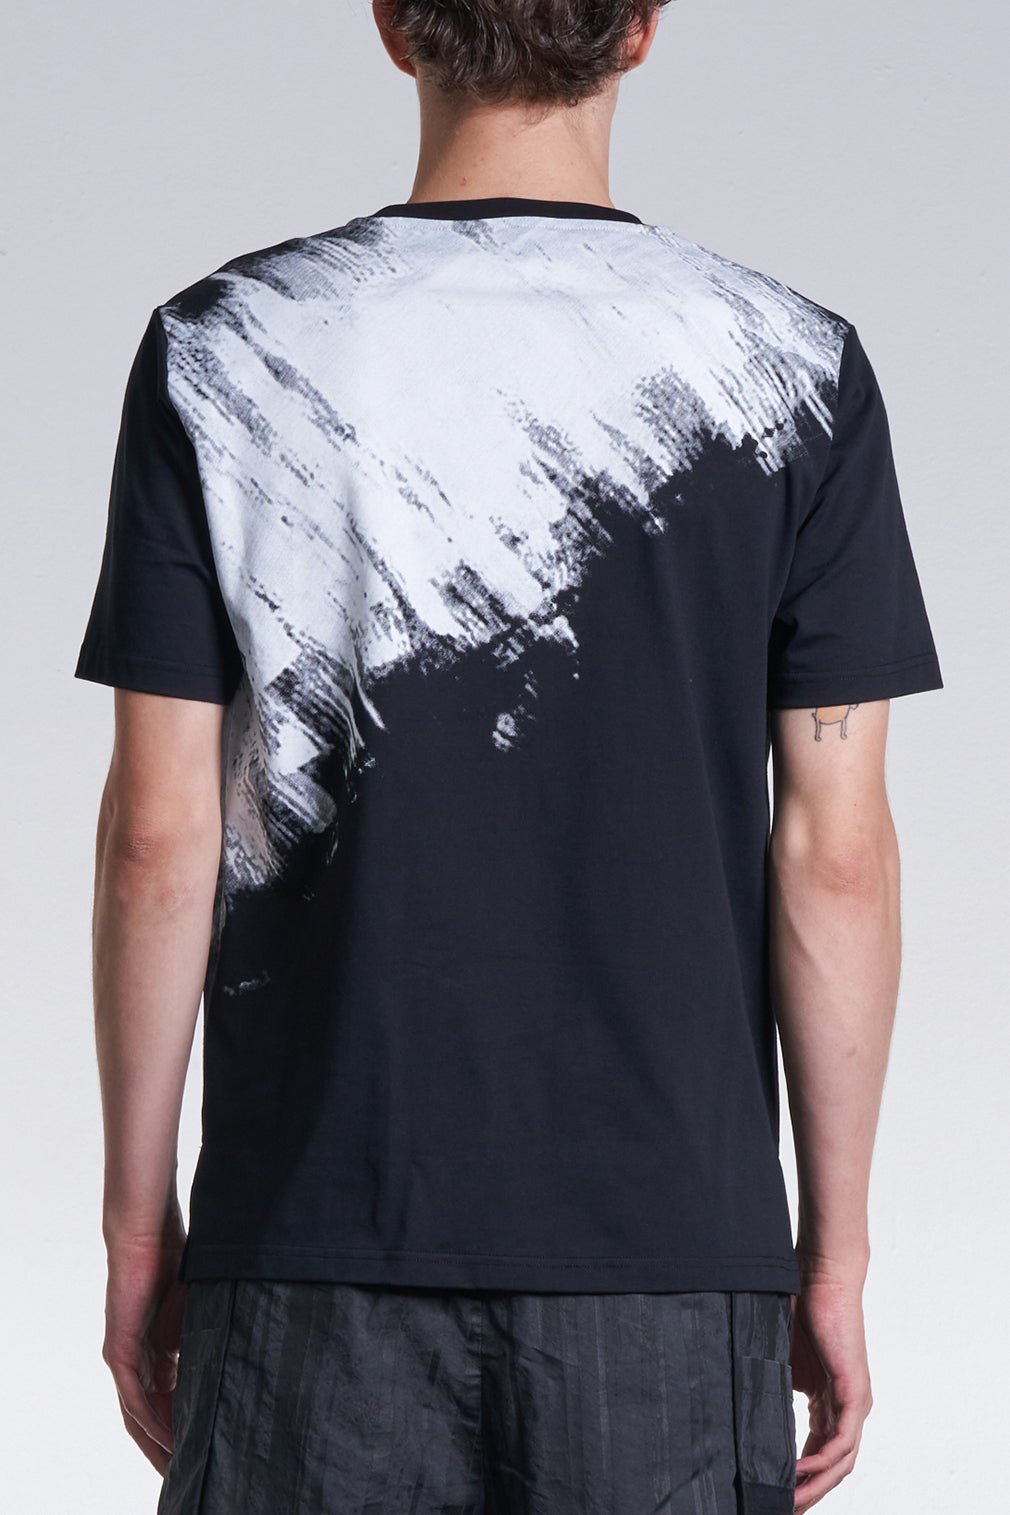 Tee With Shadow Brush Drawing